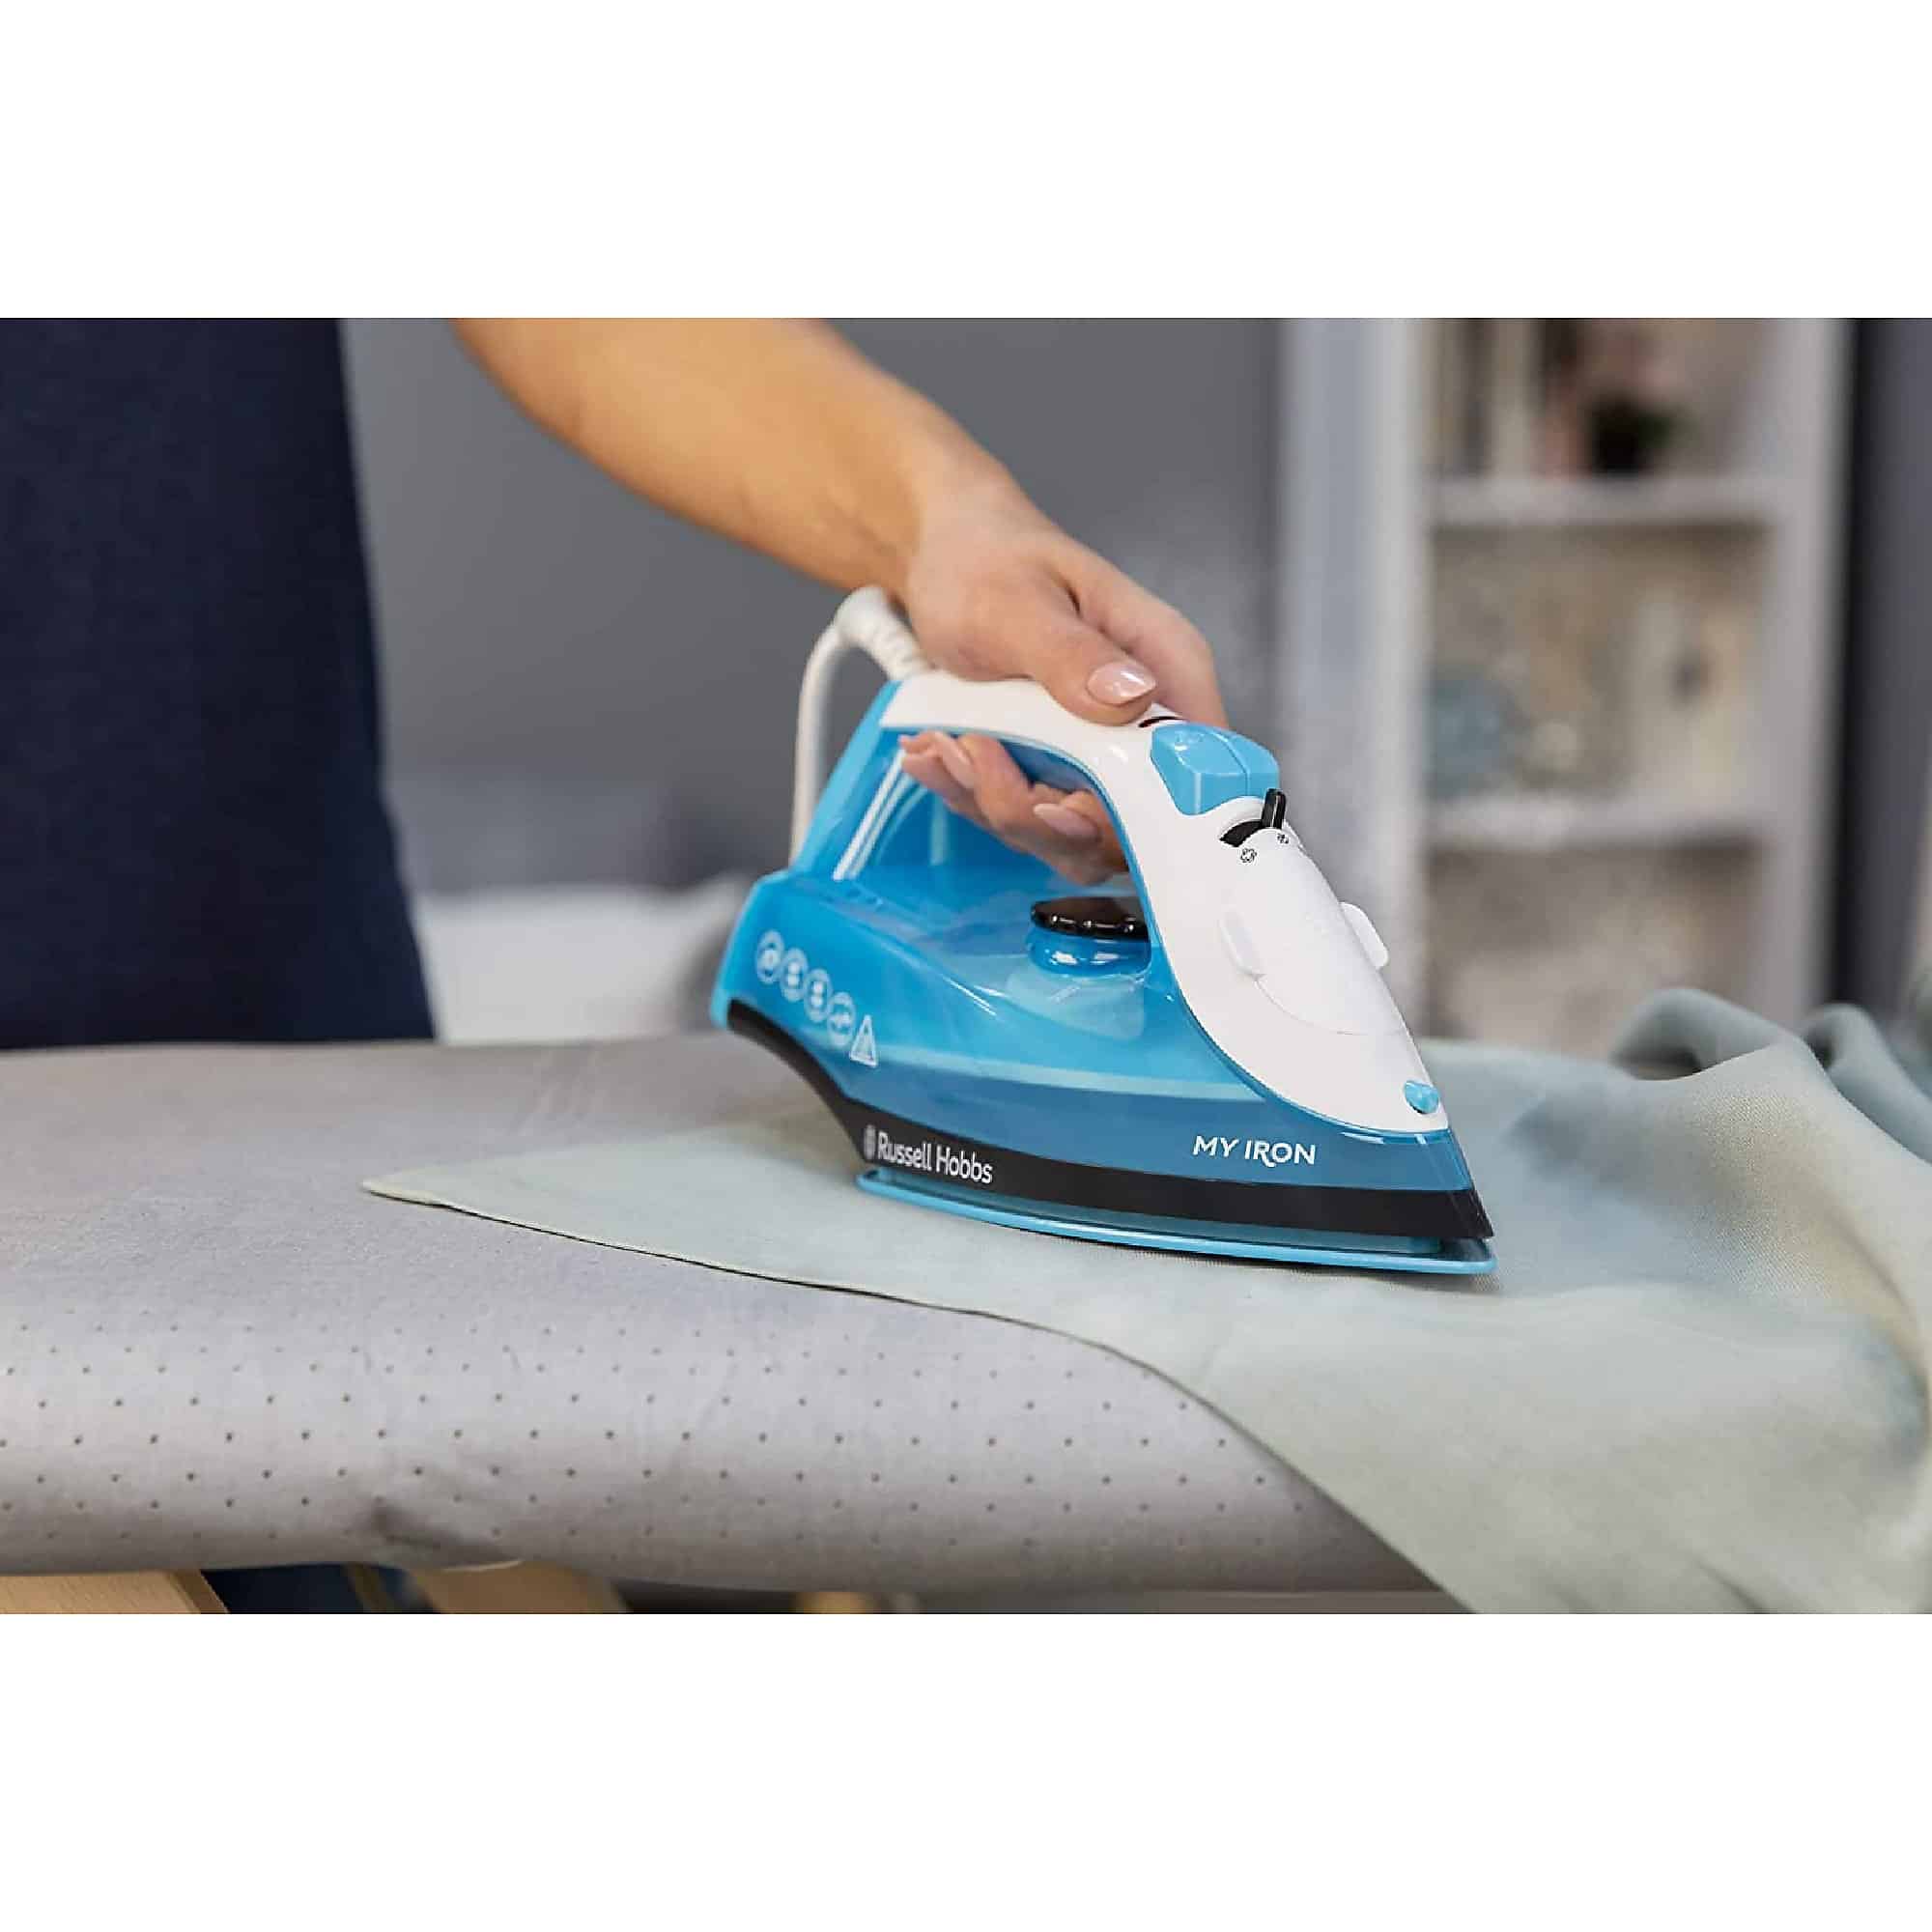 Russell Hobbs 25580 My Iron Steam Iron 1800W, 0.26L Water Tank - Blue and White-1123